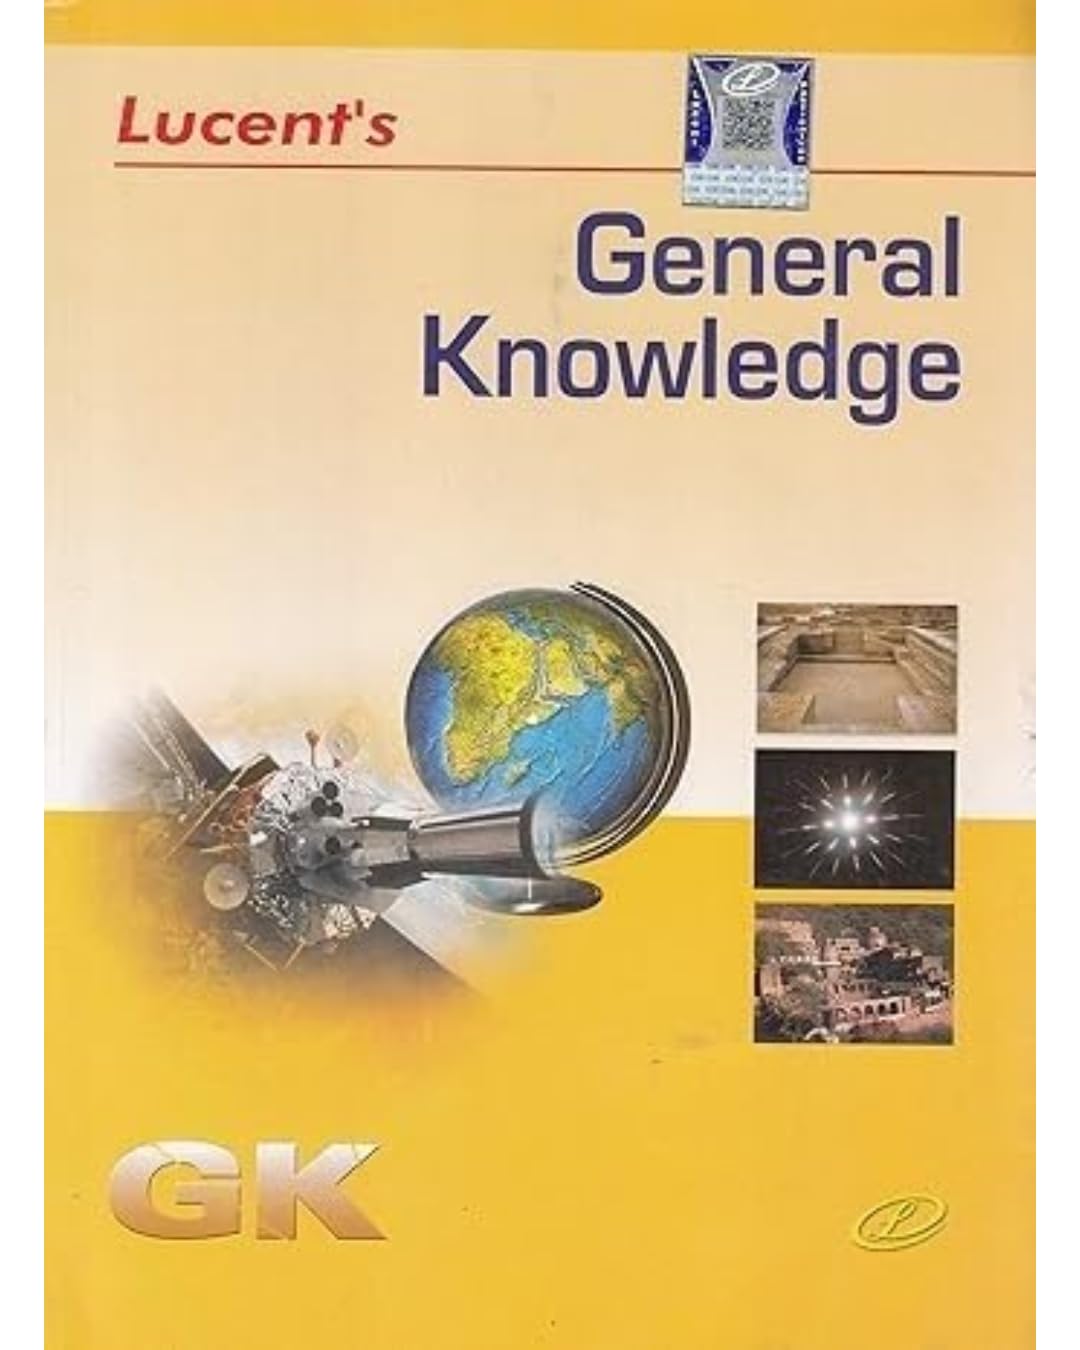 LUCENT GENRAL KNOWLEDGE (GK) IN ENGLISH FOR EXAMS 2023-24 // NEW 13TH EDITION REVISED IN DATED (2023-10-01)